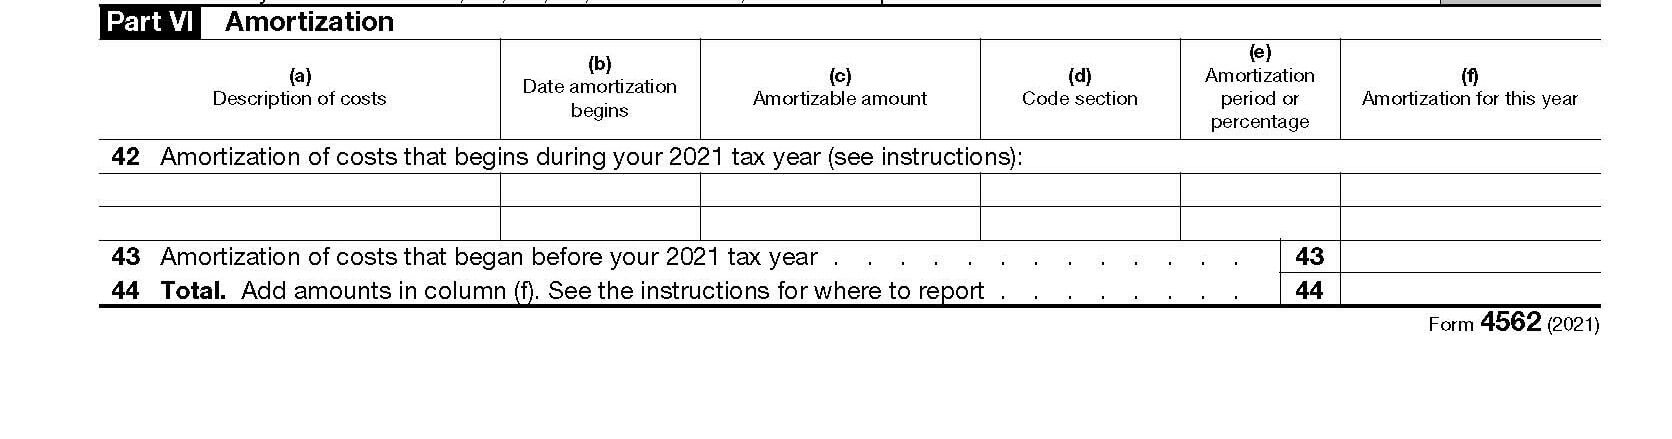 irs form 4562 example 06